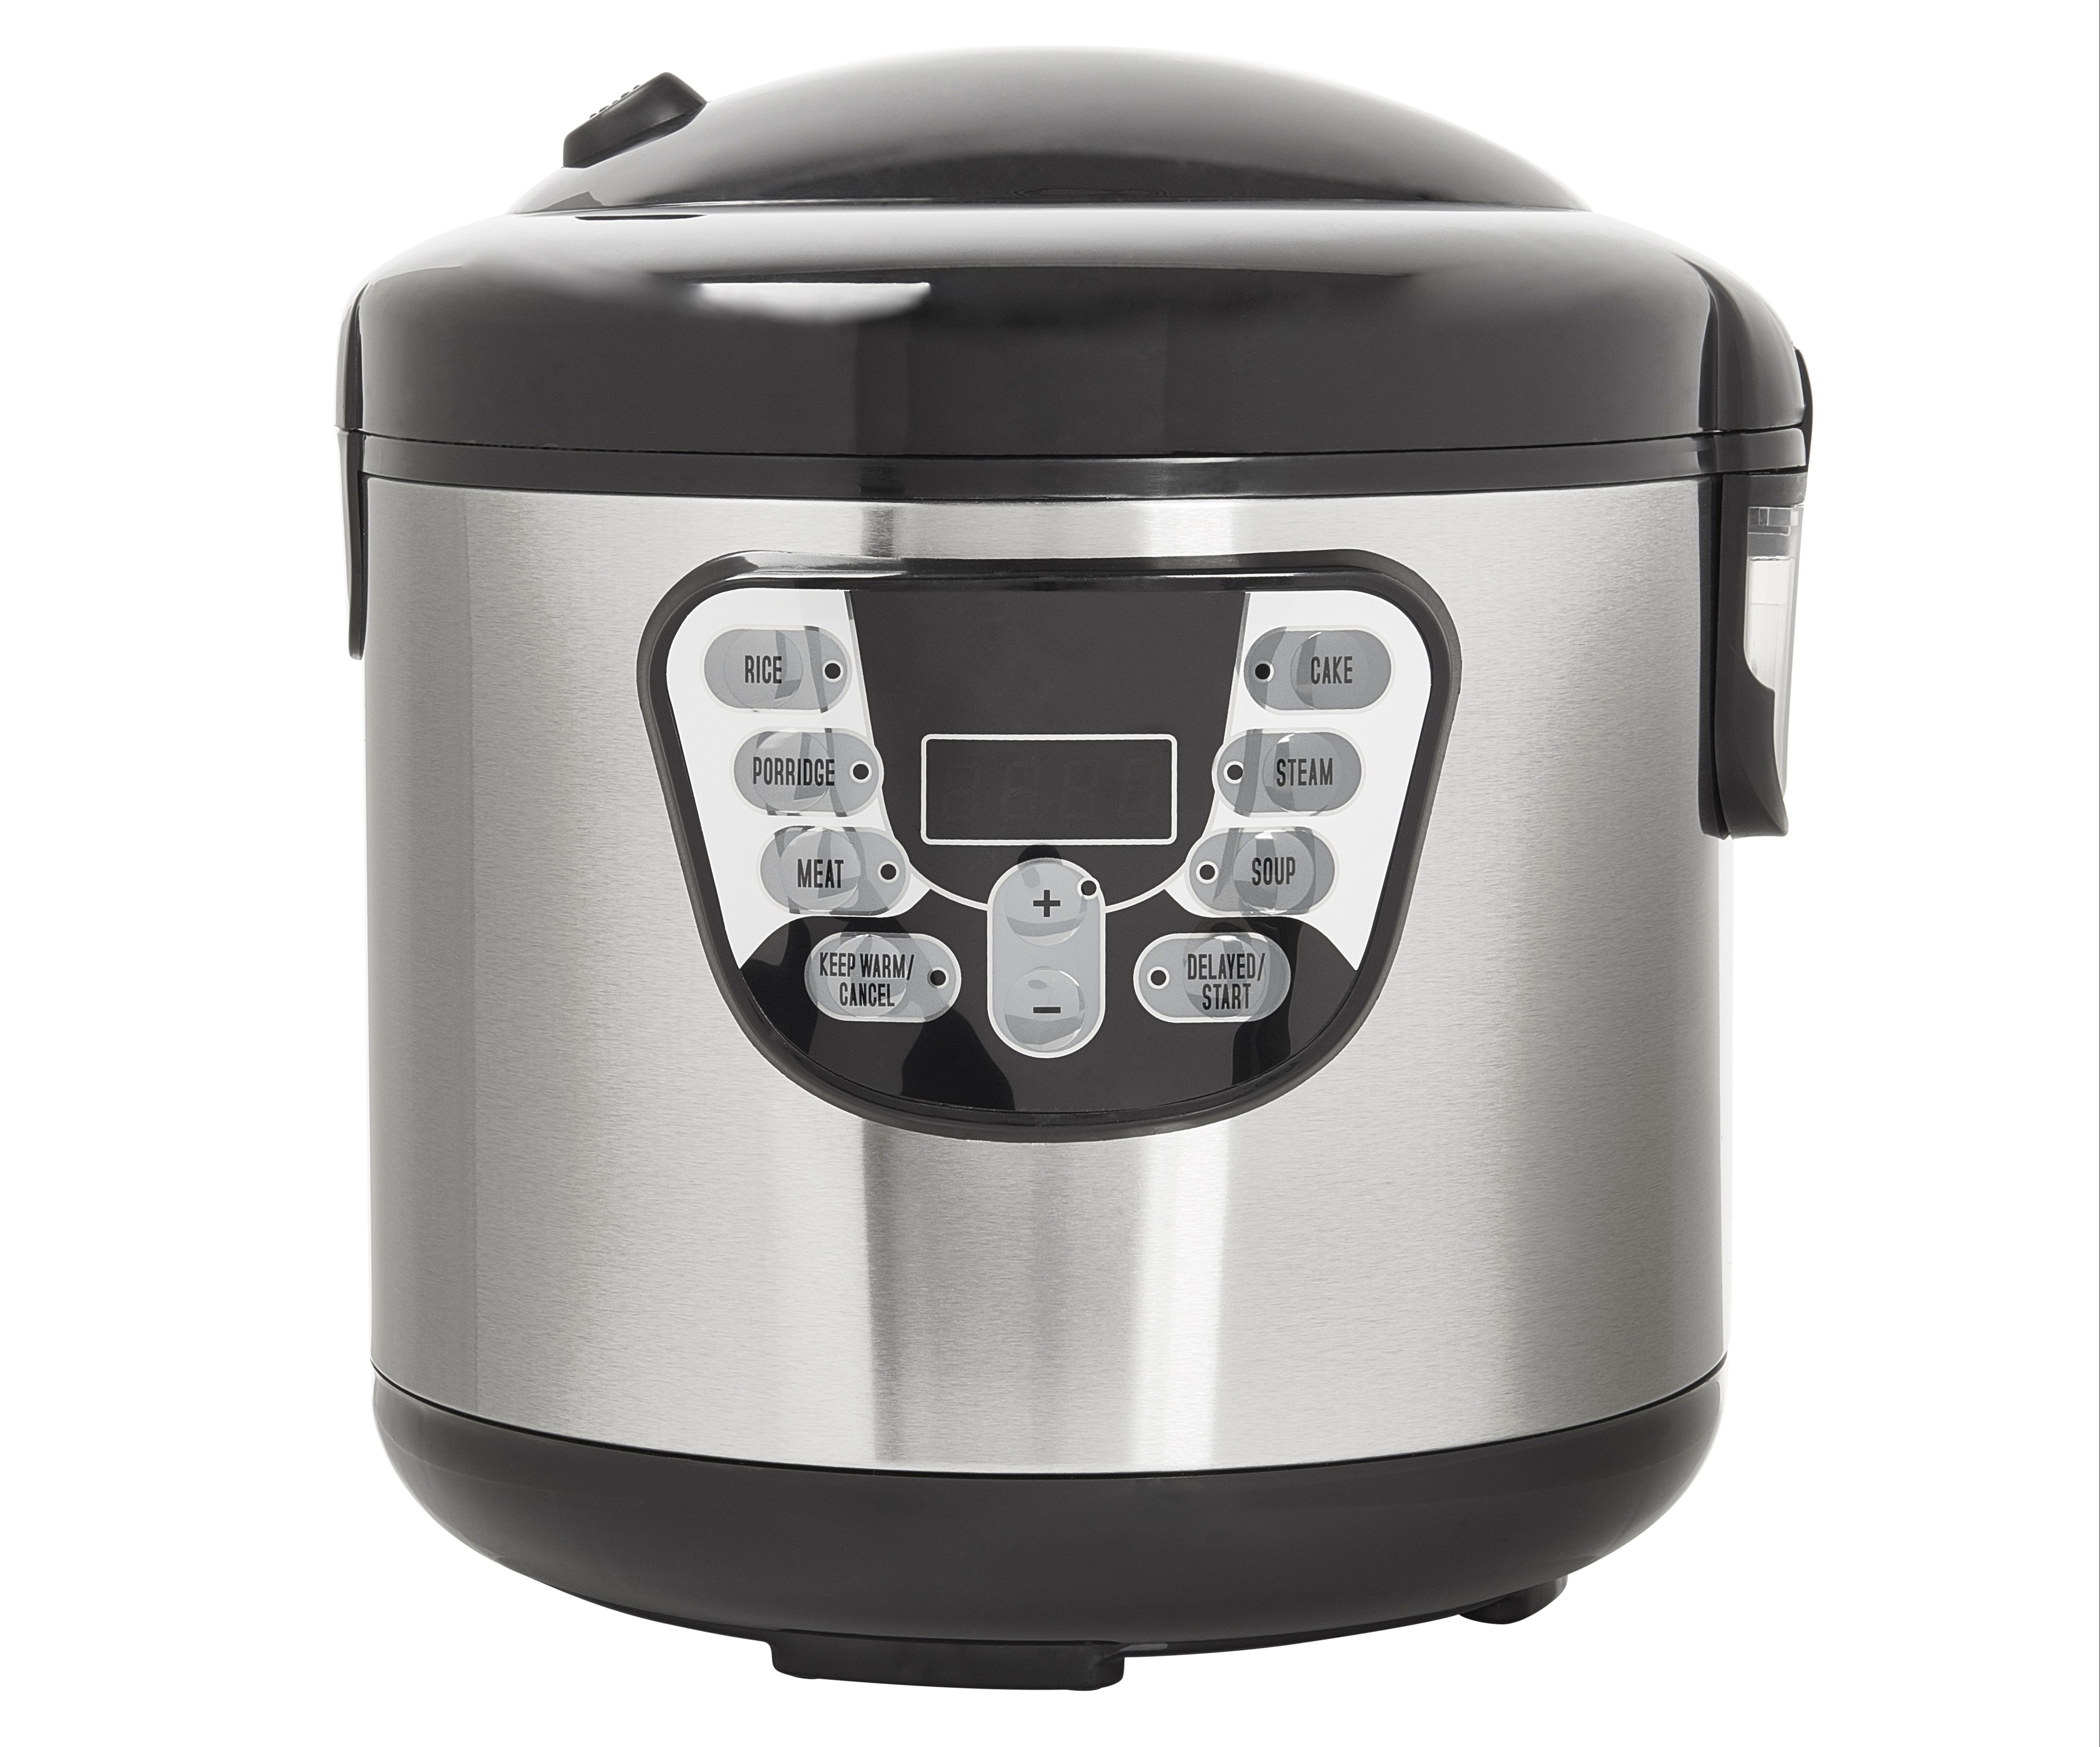 Add to your kitchen options with Wilko's multi-cooker with a discounted price